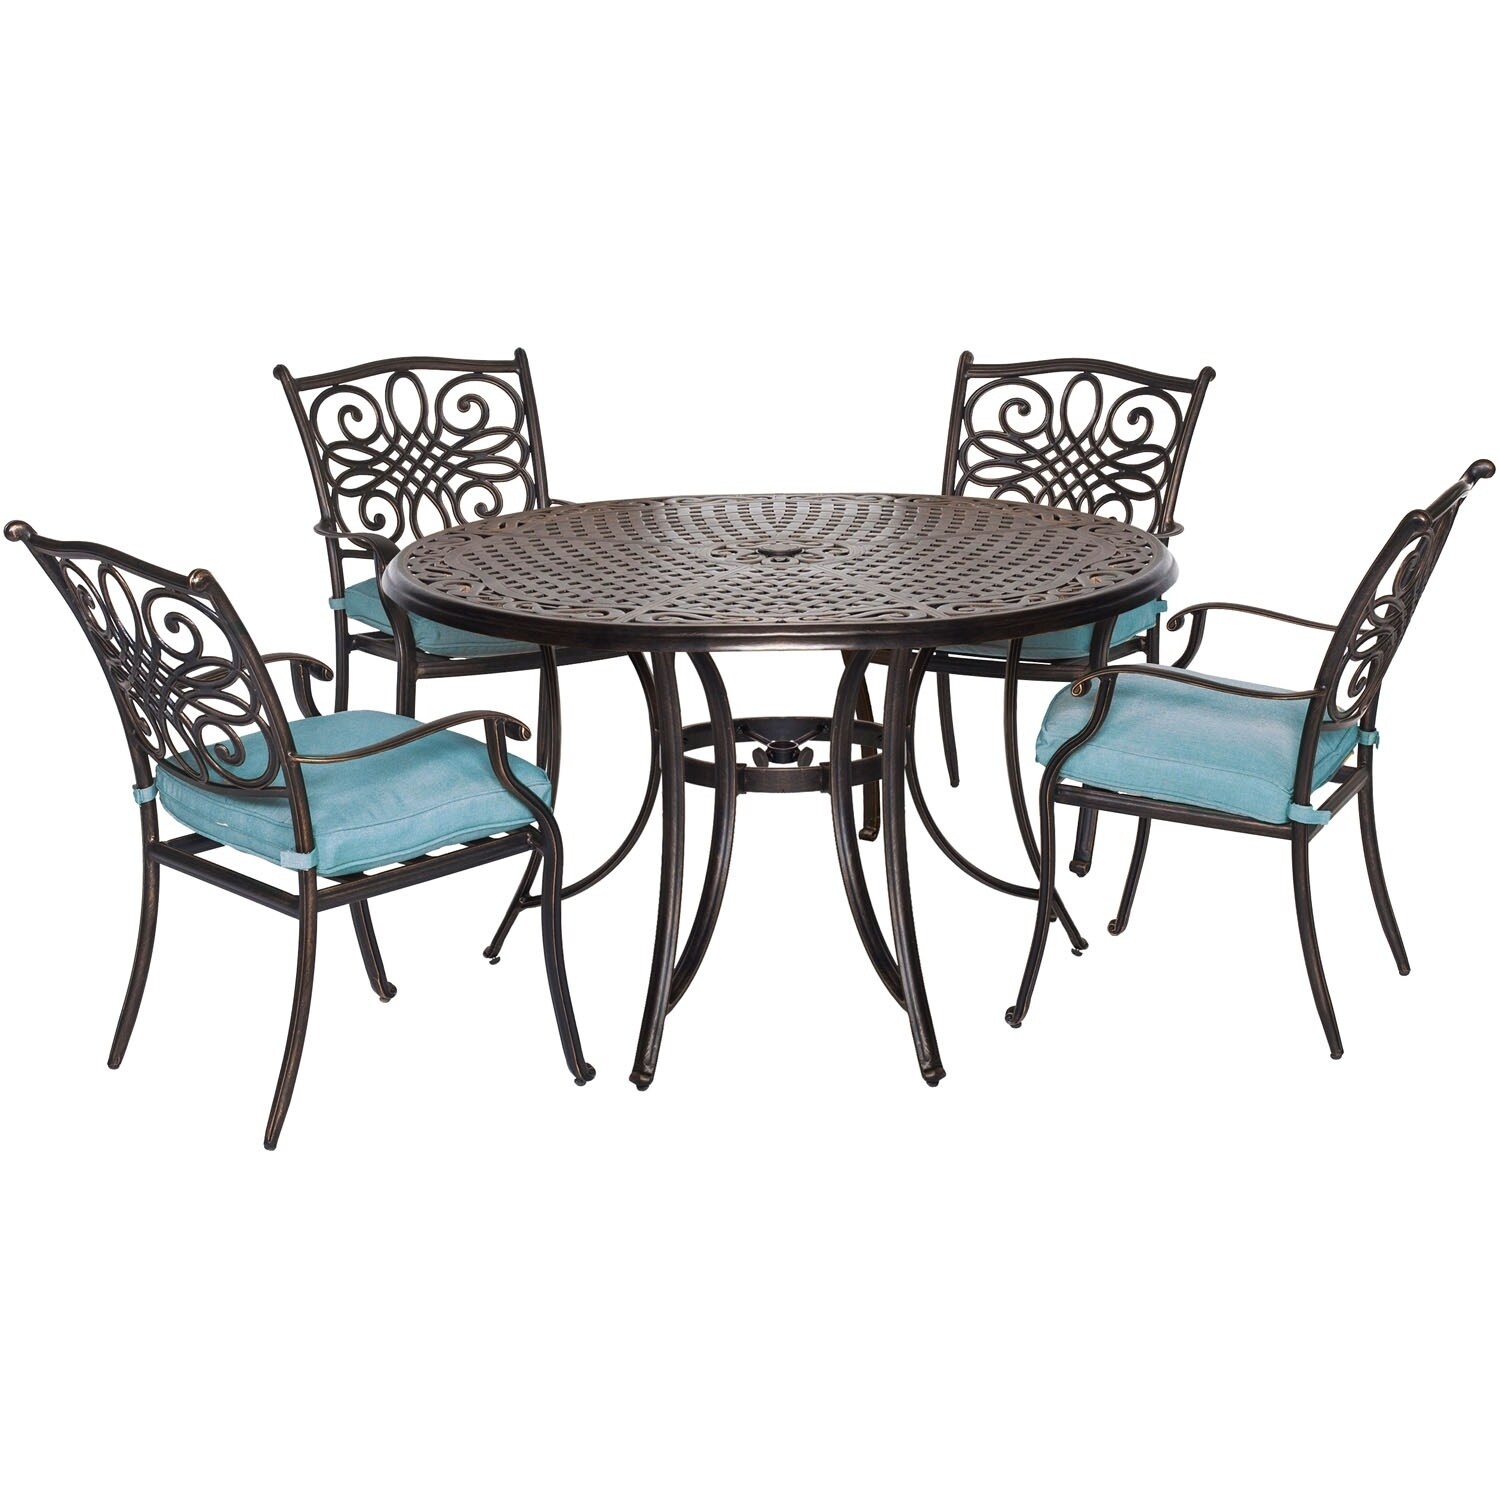 Hanover Outdoor Traditions 5-piece Dining Set